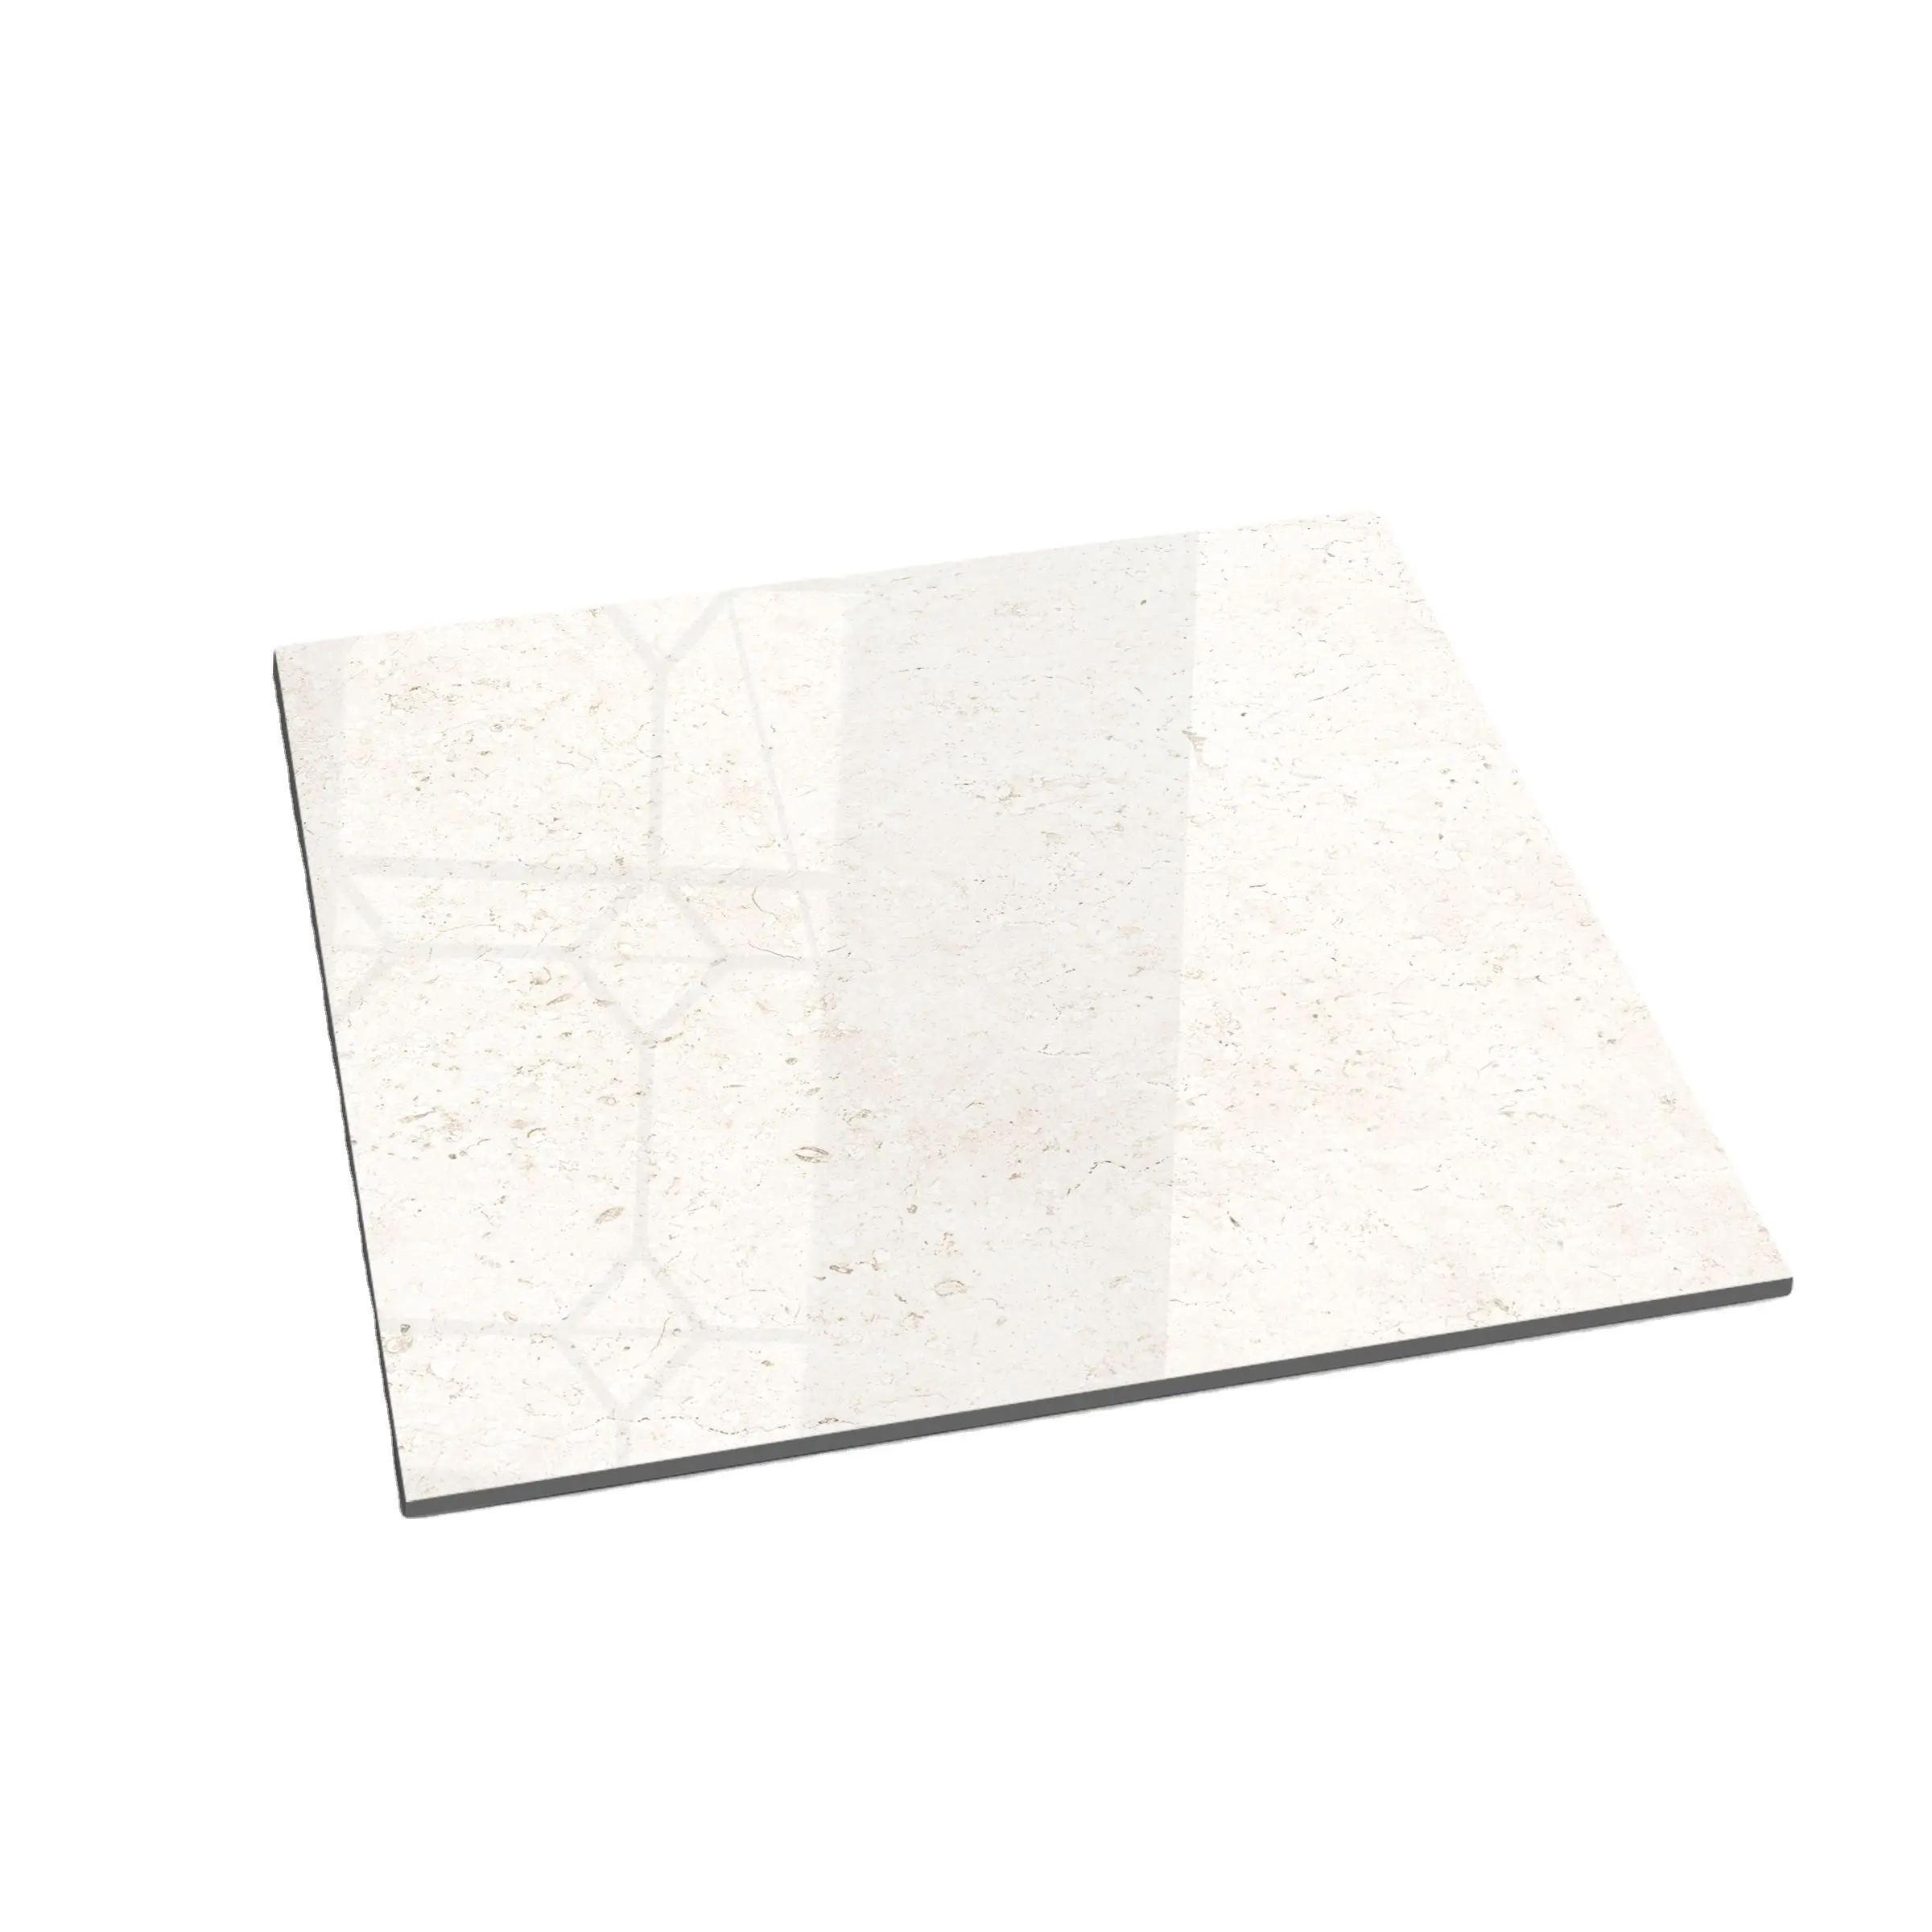 Beige Colorize fast selling modern style ivory italian look 600x600 mm marble floors wall tile for home decor